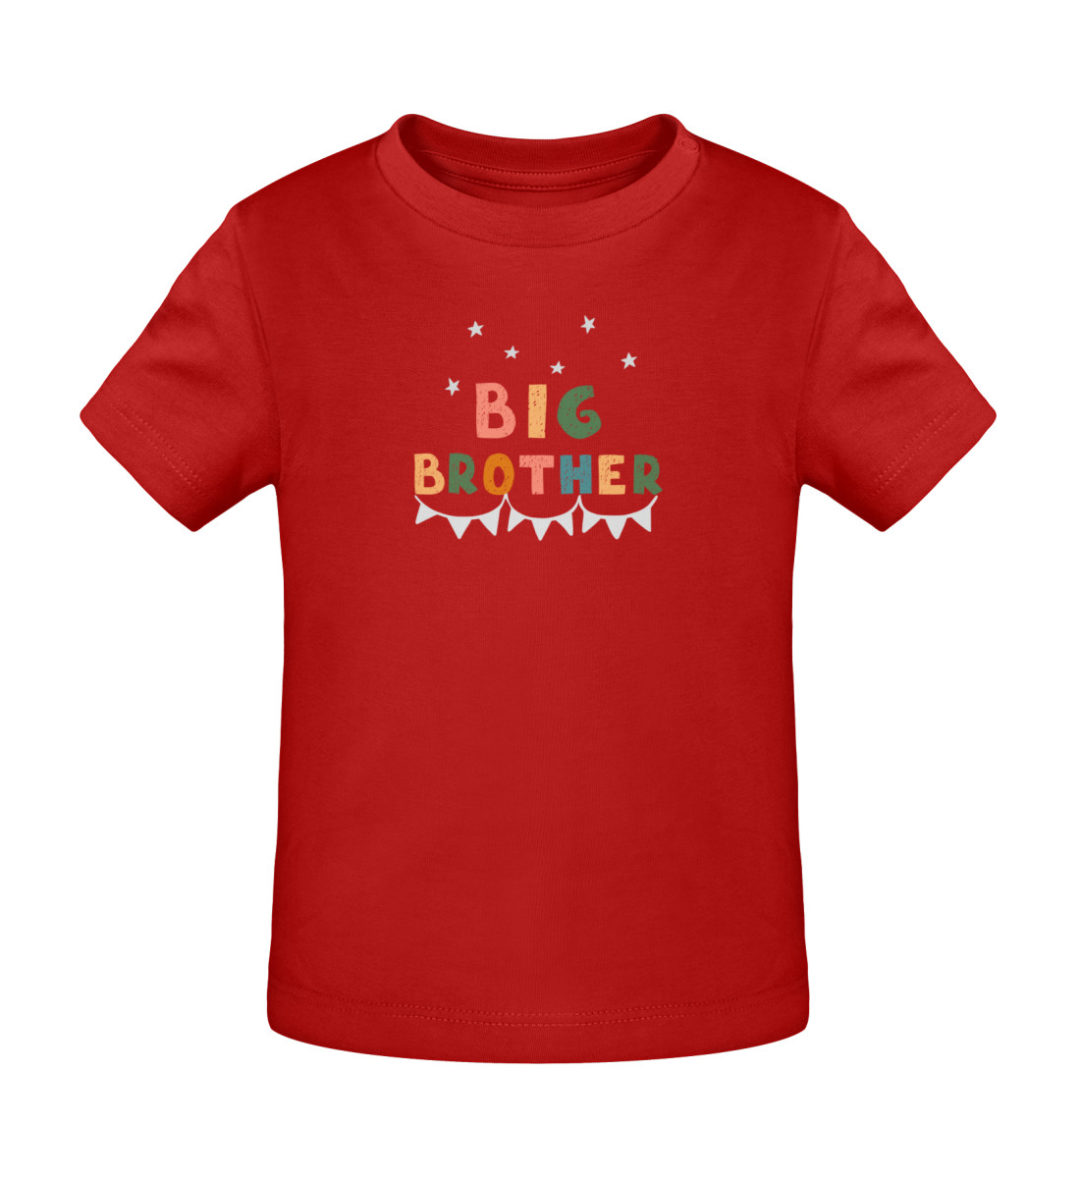 Big Brother - Baby Creator T-Shirt ST/ST-4